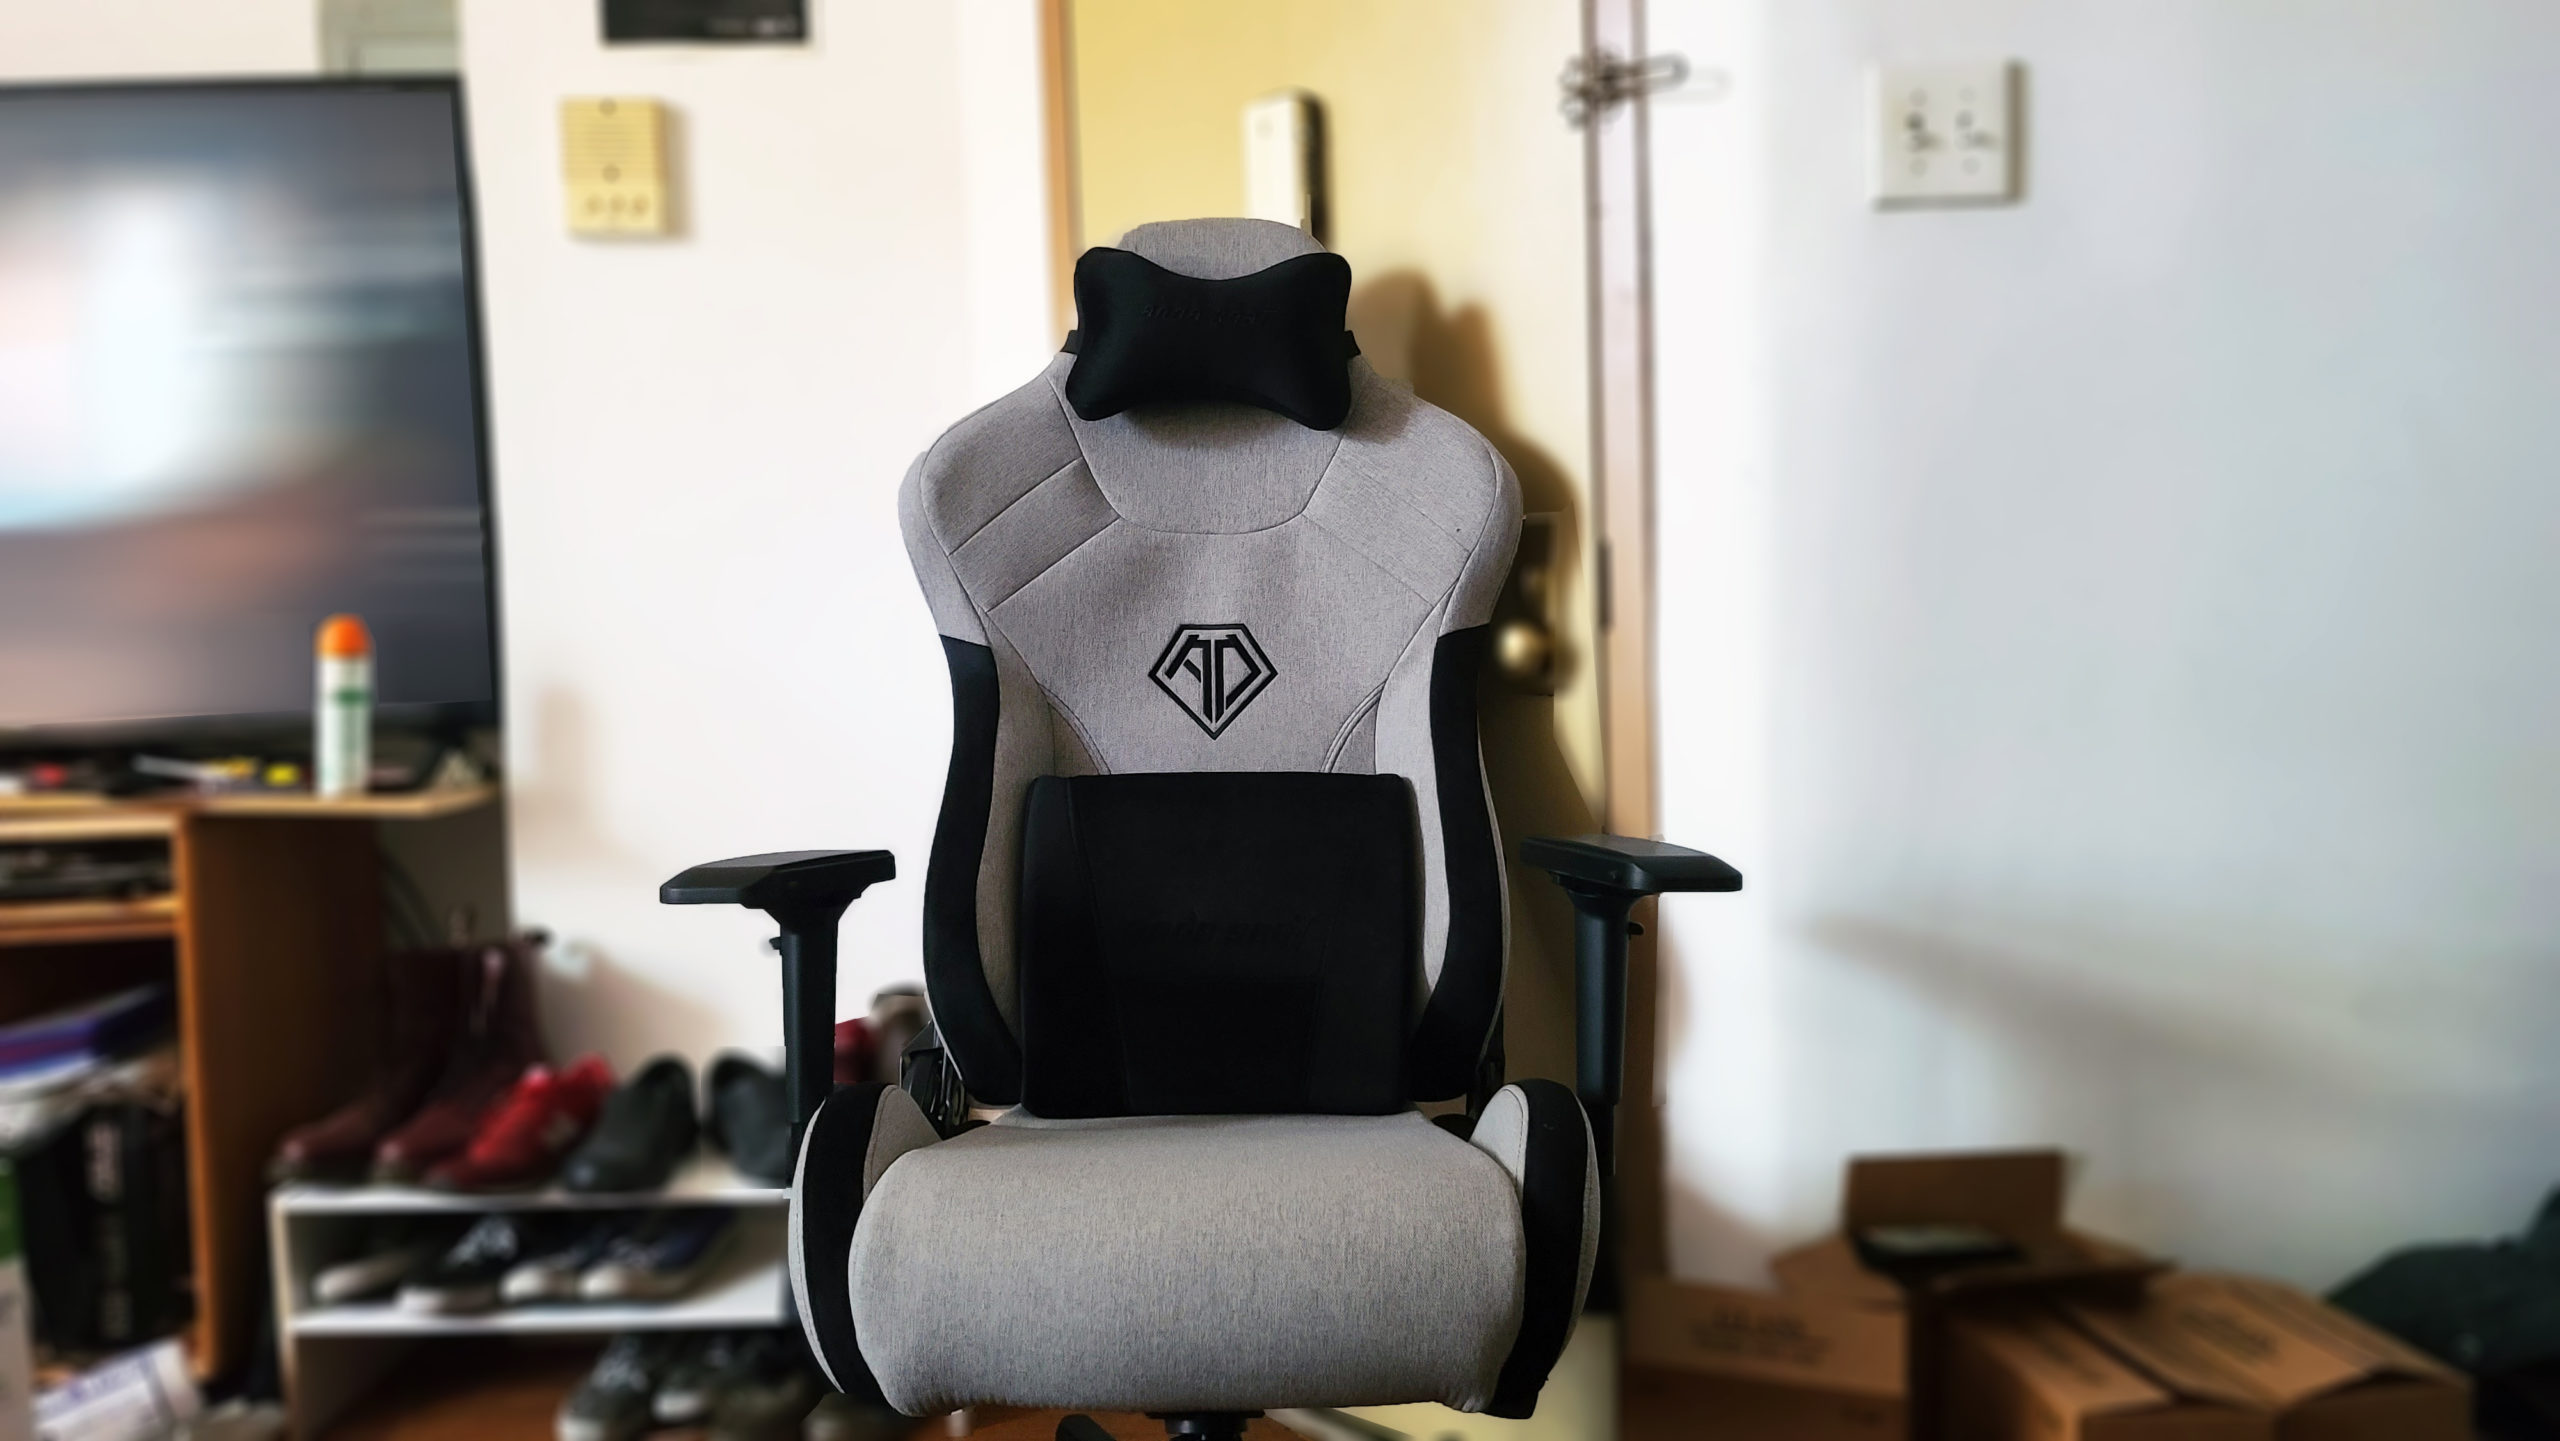 anda-seat-t-pro-2-series-review:-big-chair-for-big-people